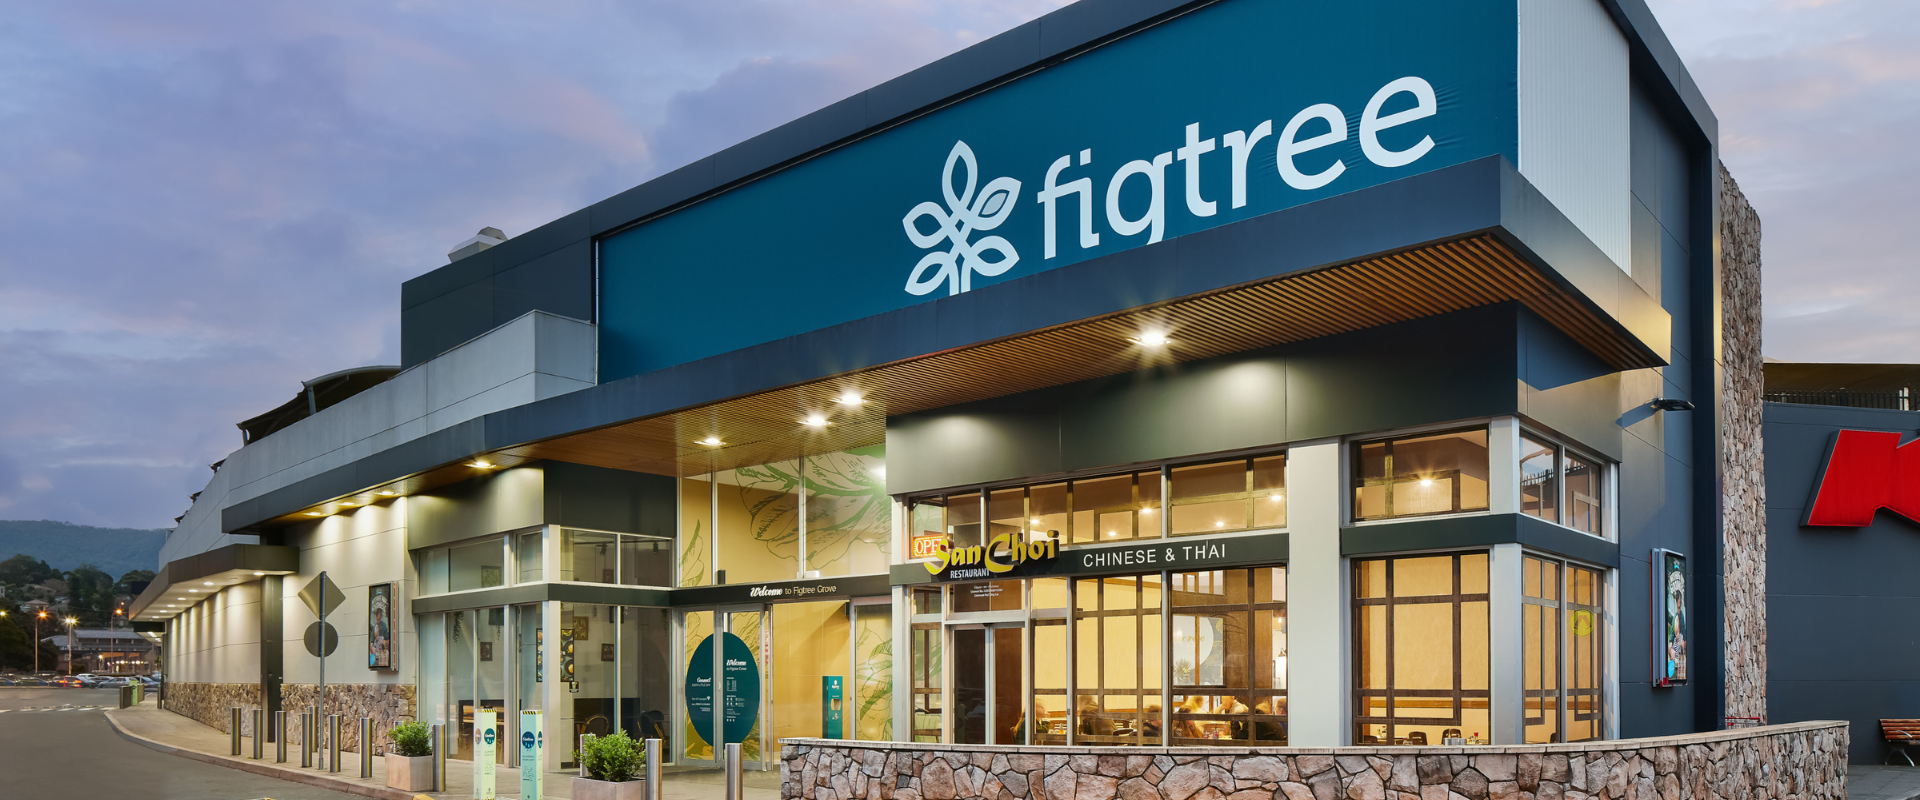 FIGTREE GROVE SHOPPING CENTRE